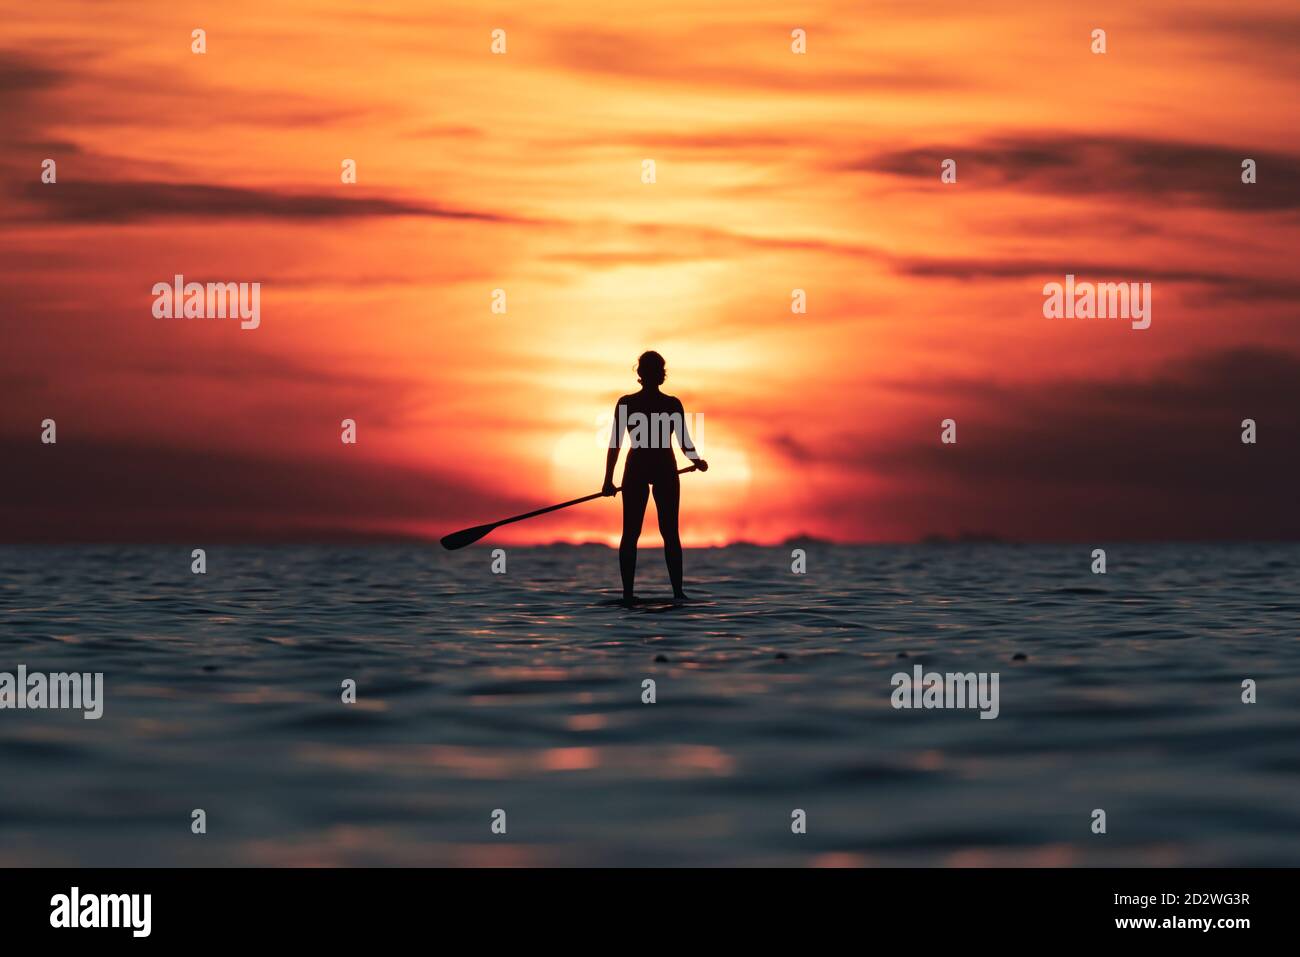 Silhouette of faceless female surfer standing on paddle board and rowing against spectacular sun in sunset sky Stock Photo